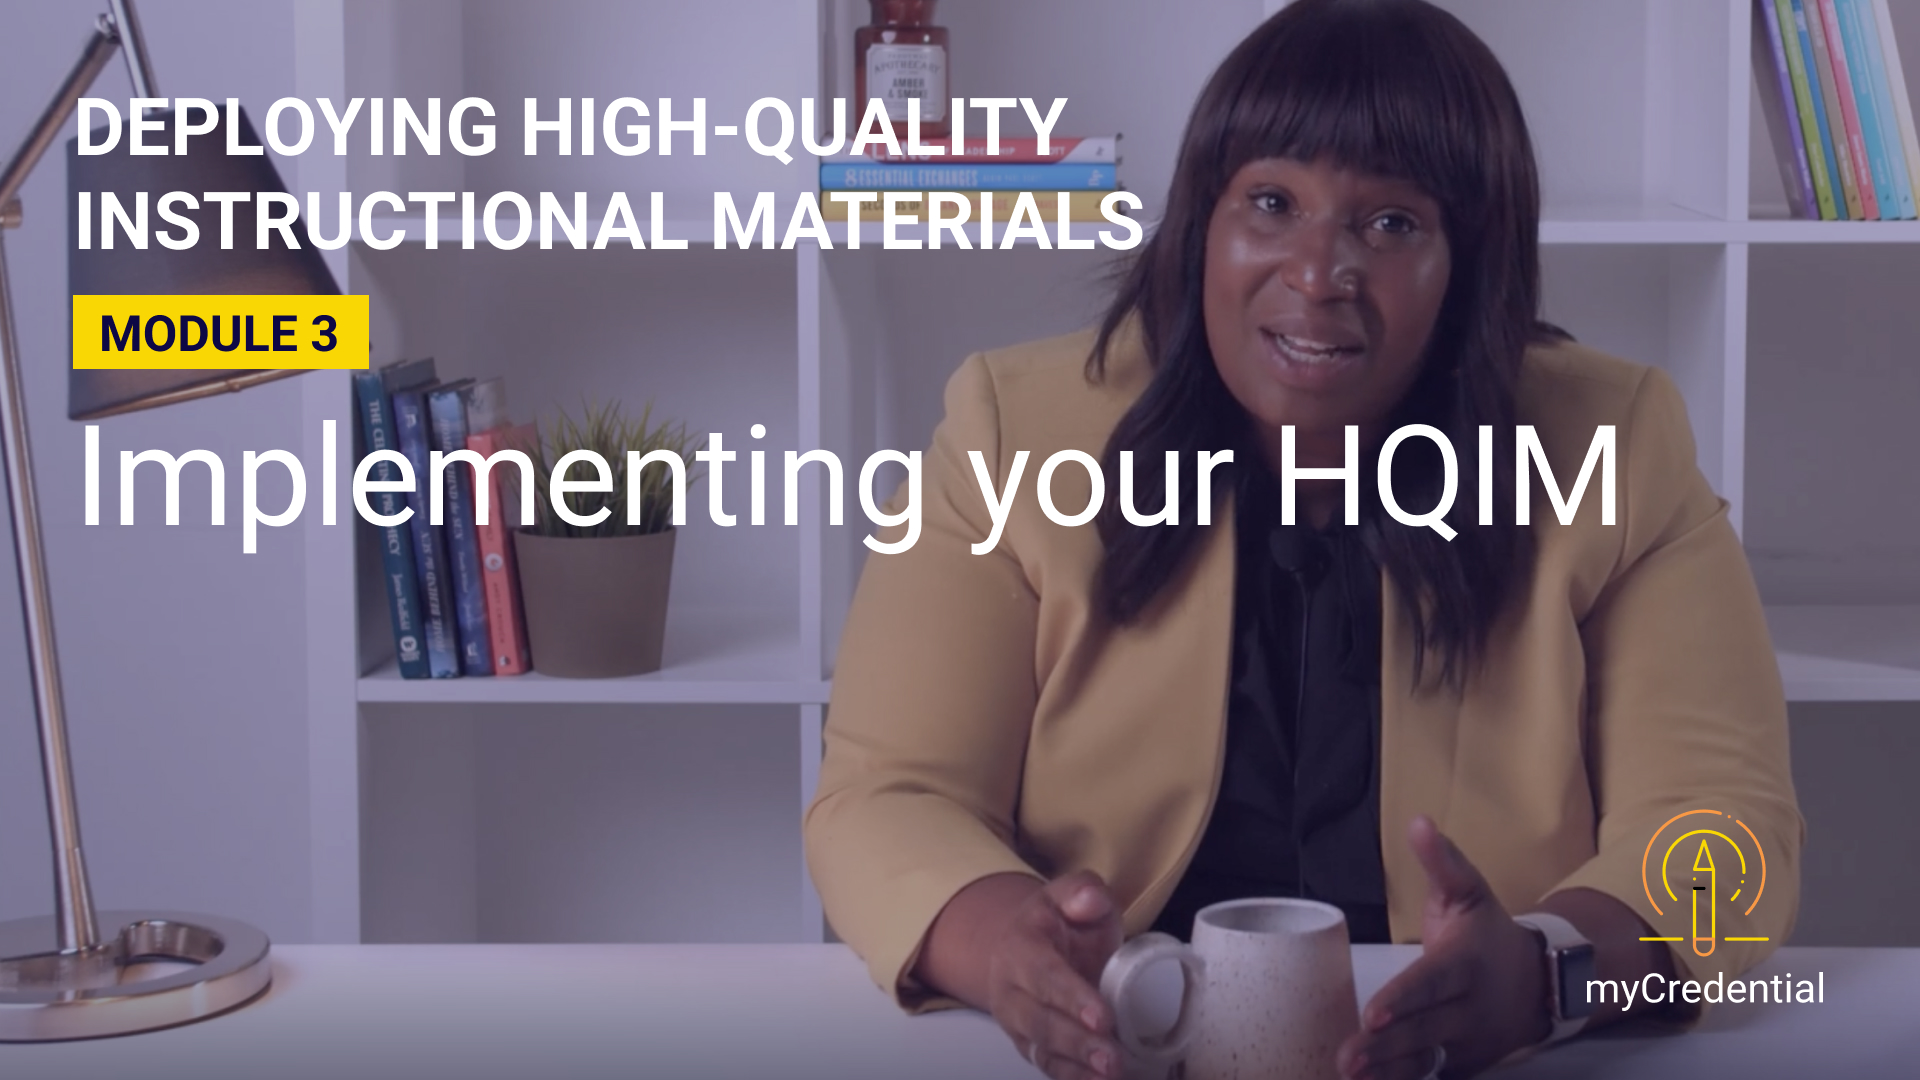 Deploying High-Quality Instructional Materials (Module 3): Implementing your HQIM